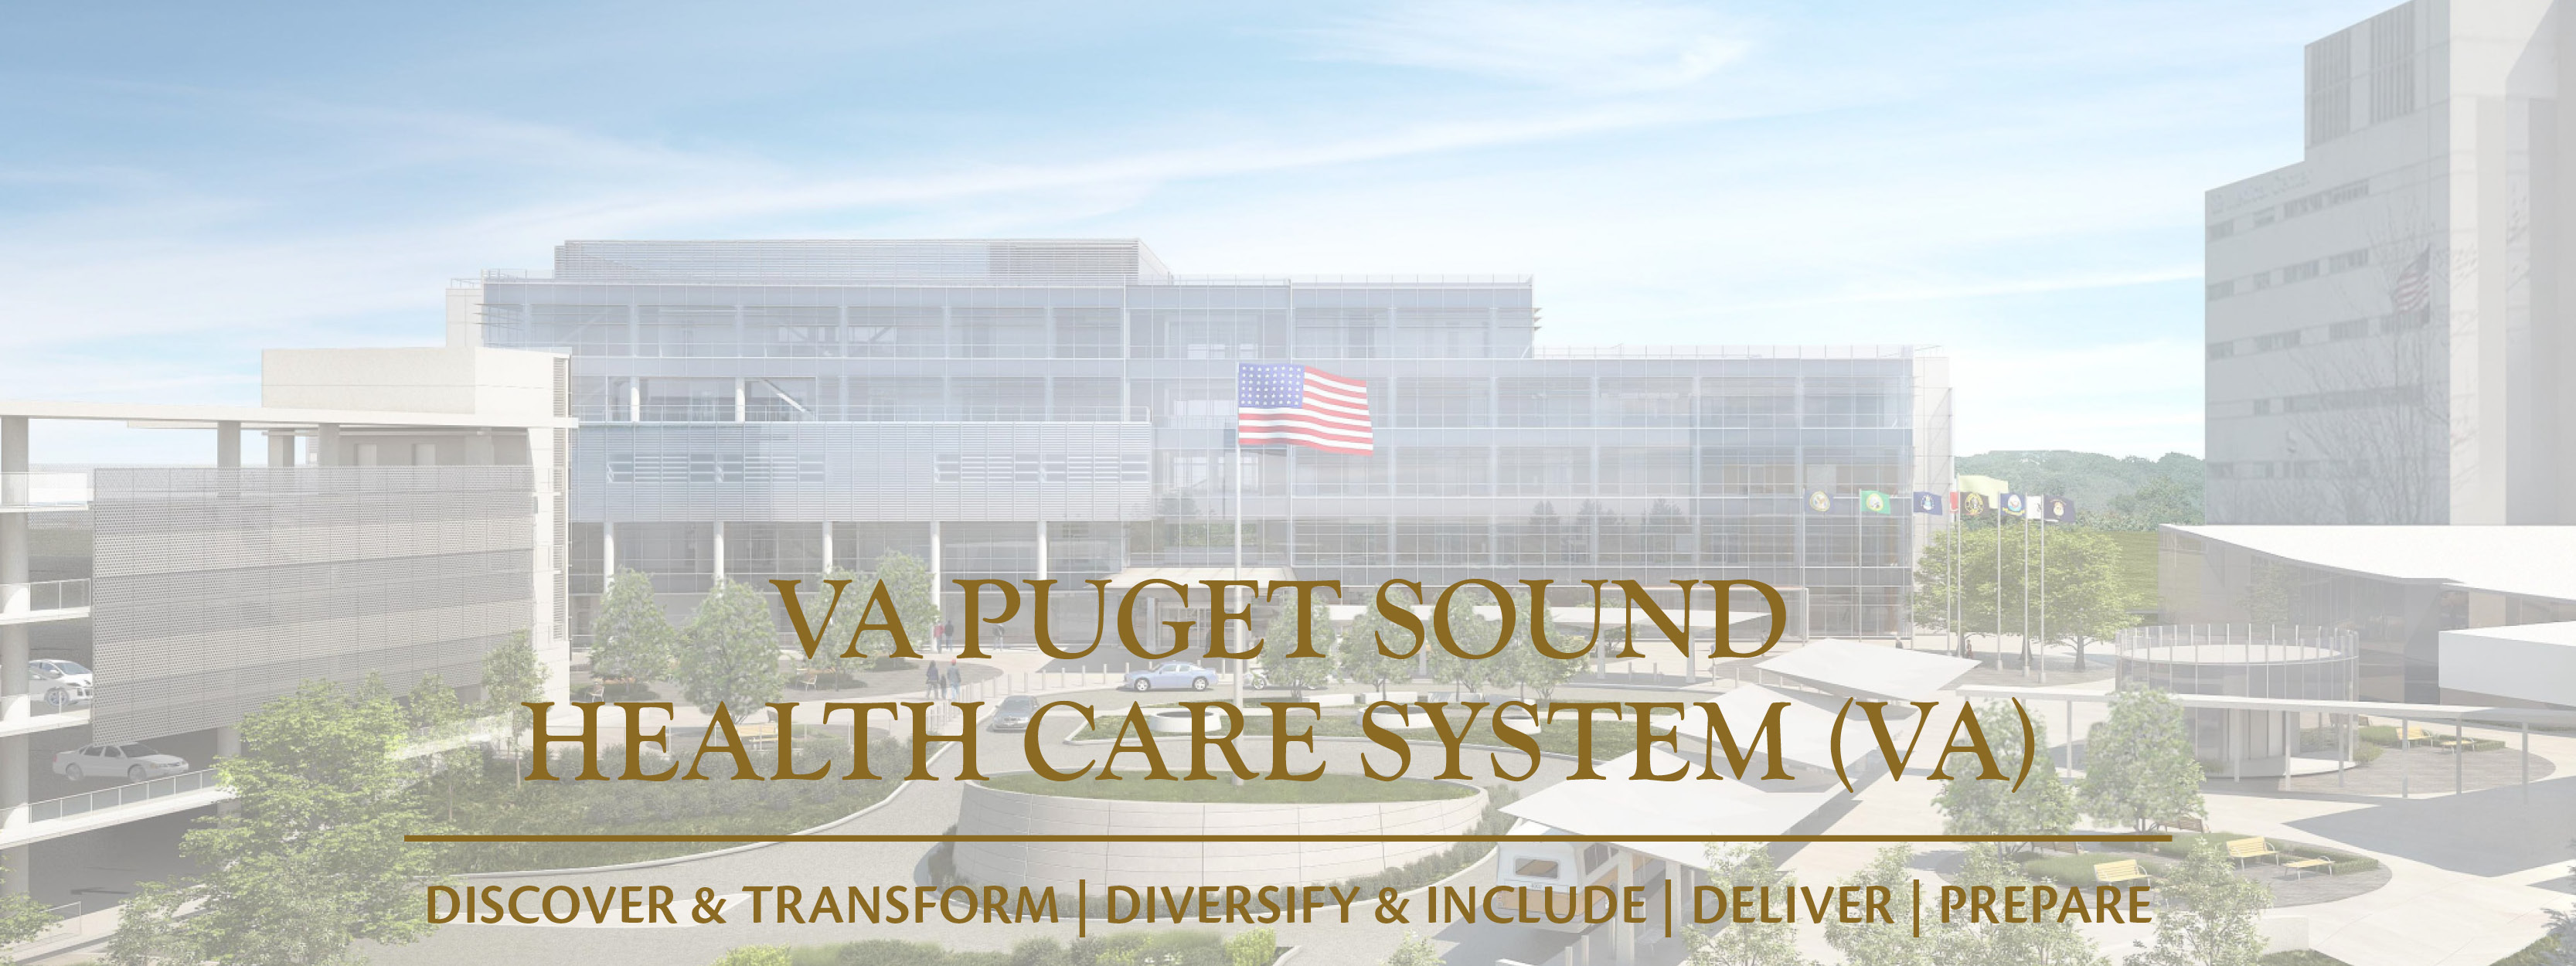 Division Of Va Health Care Department Of Surgery